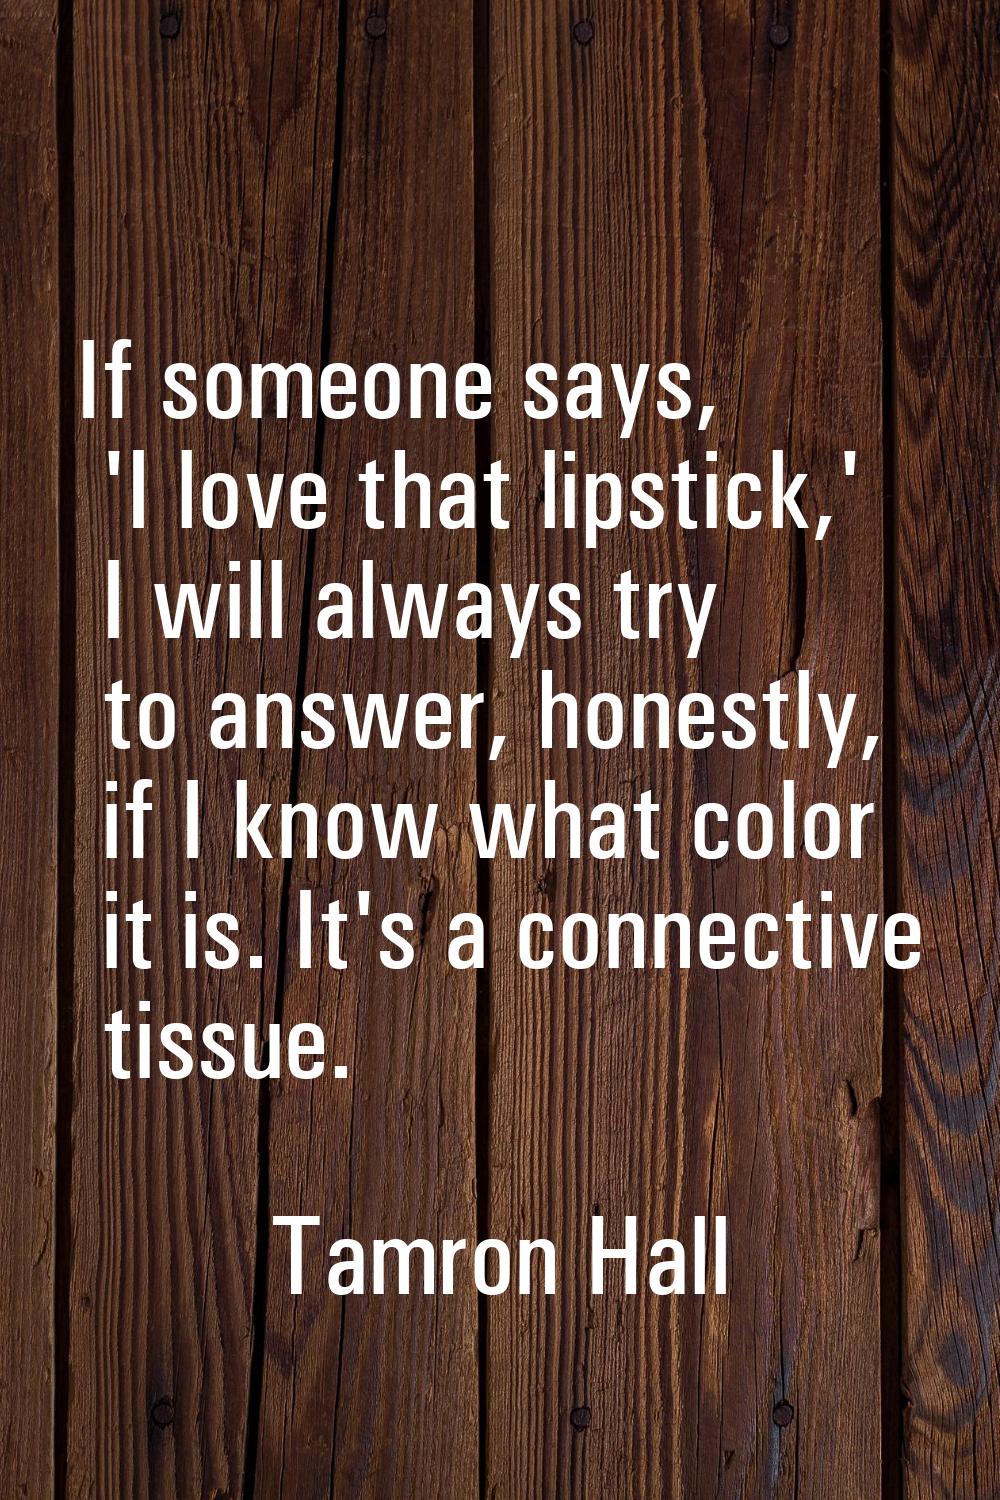 If someone says, 'I love that lipstick,' I will always try to answer, honestly, if I know what colo